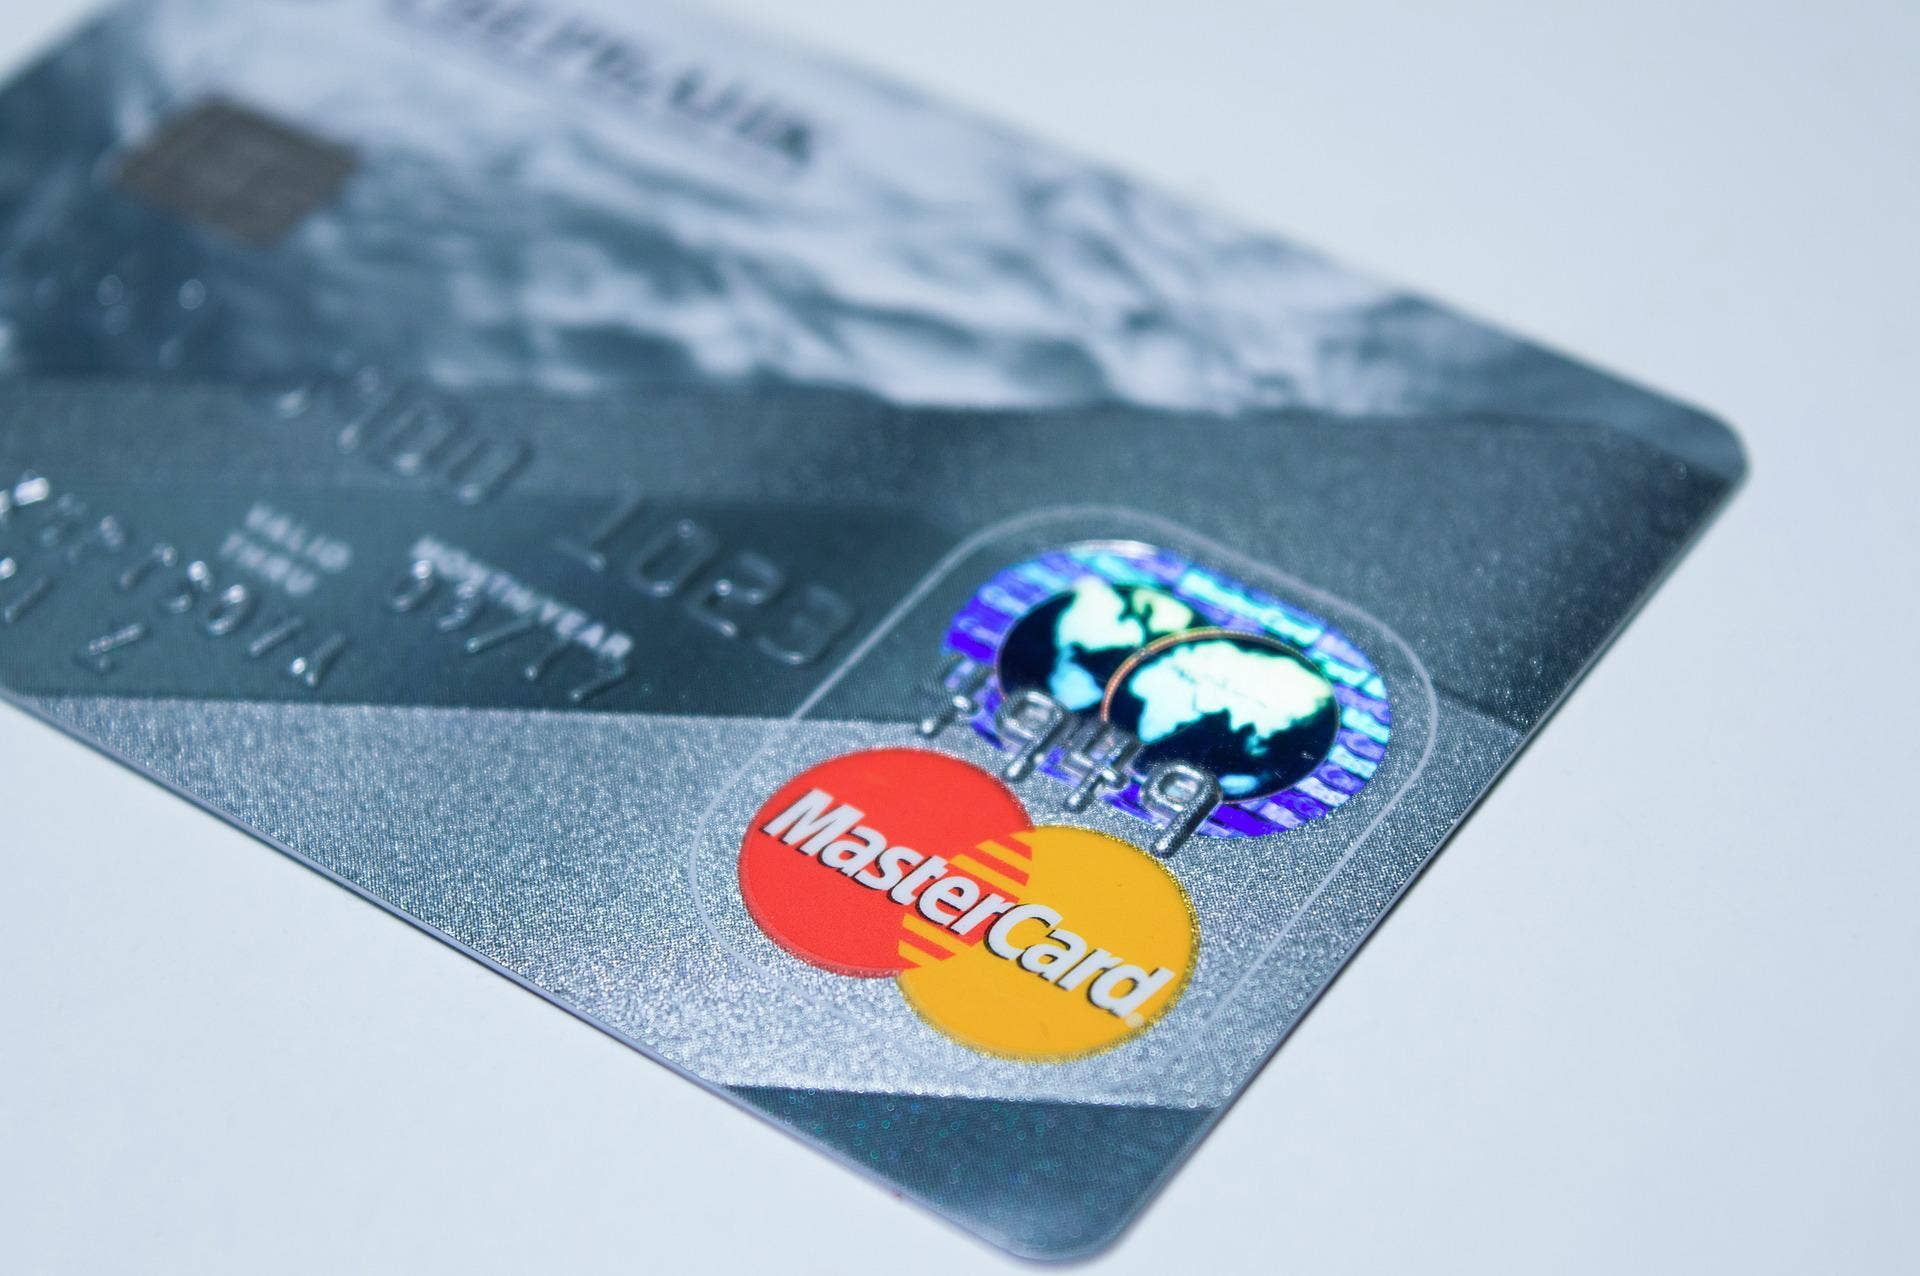 Mastercard Posts Better Than Expected Q2 Earnings As Consumer, Travel Spending Rebounds